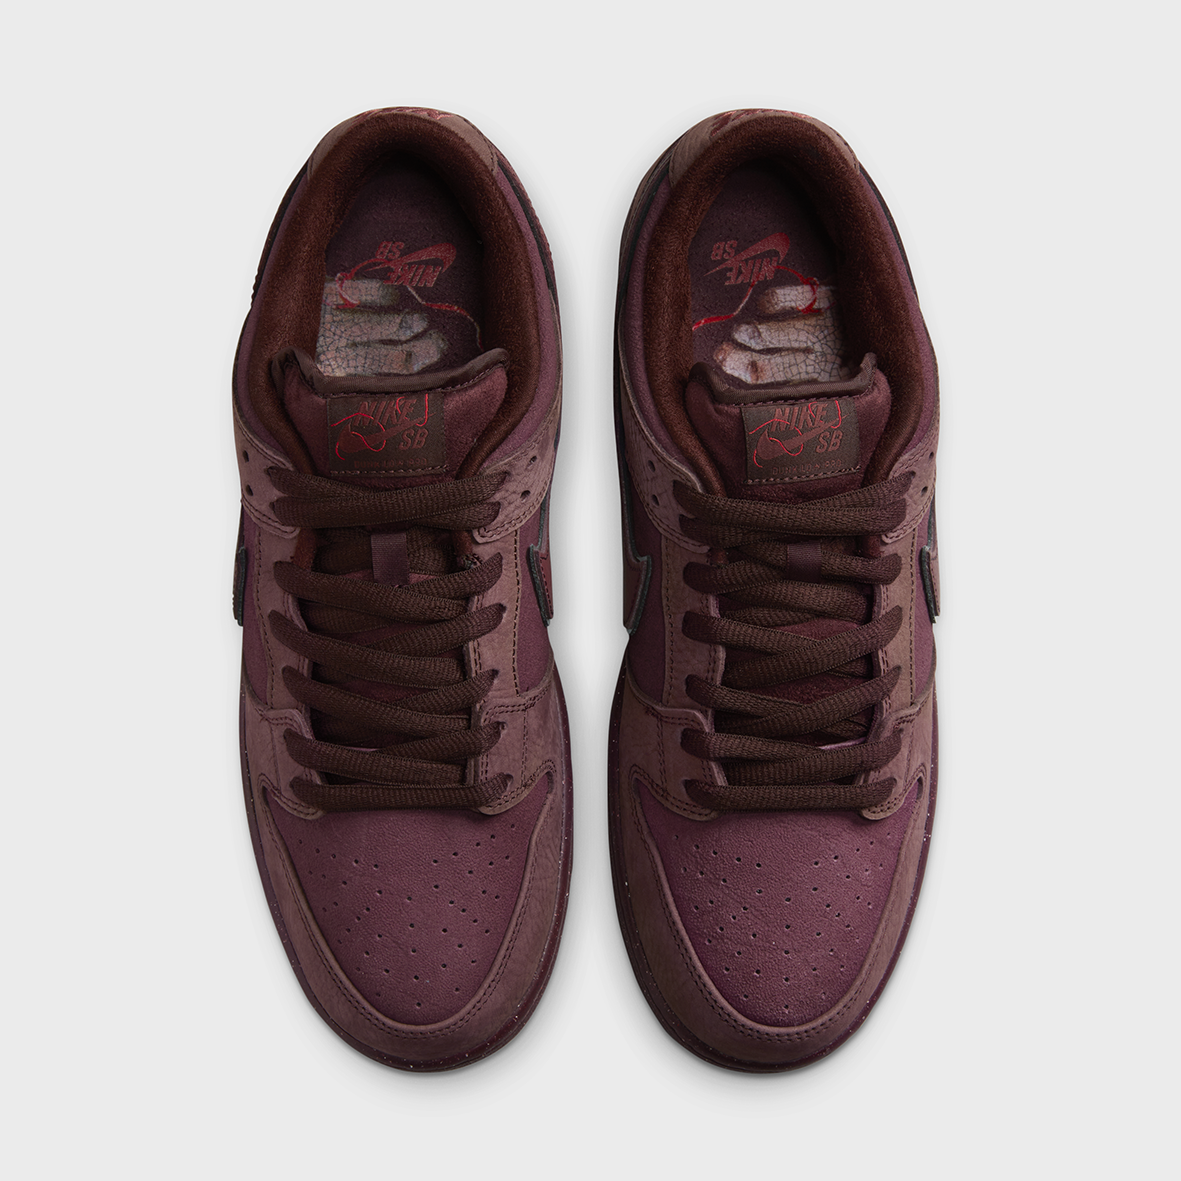 Nike SB - 'City Of Love' Dunk Low Pro Shoes (UK ONLY) - Burgundy Crush / Dark Team Red